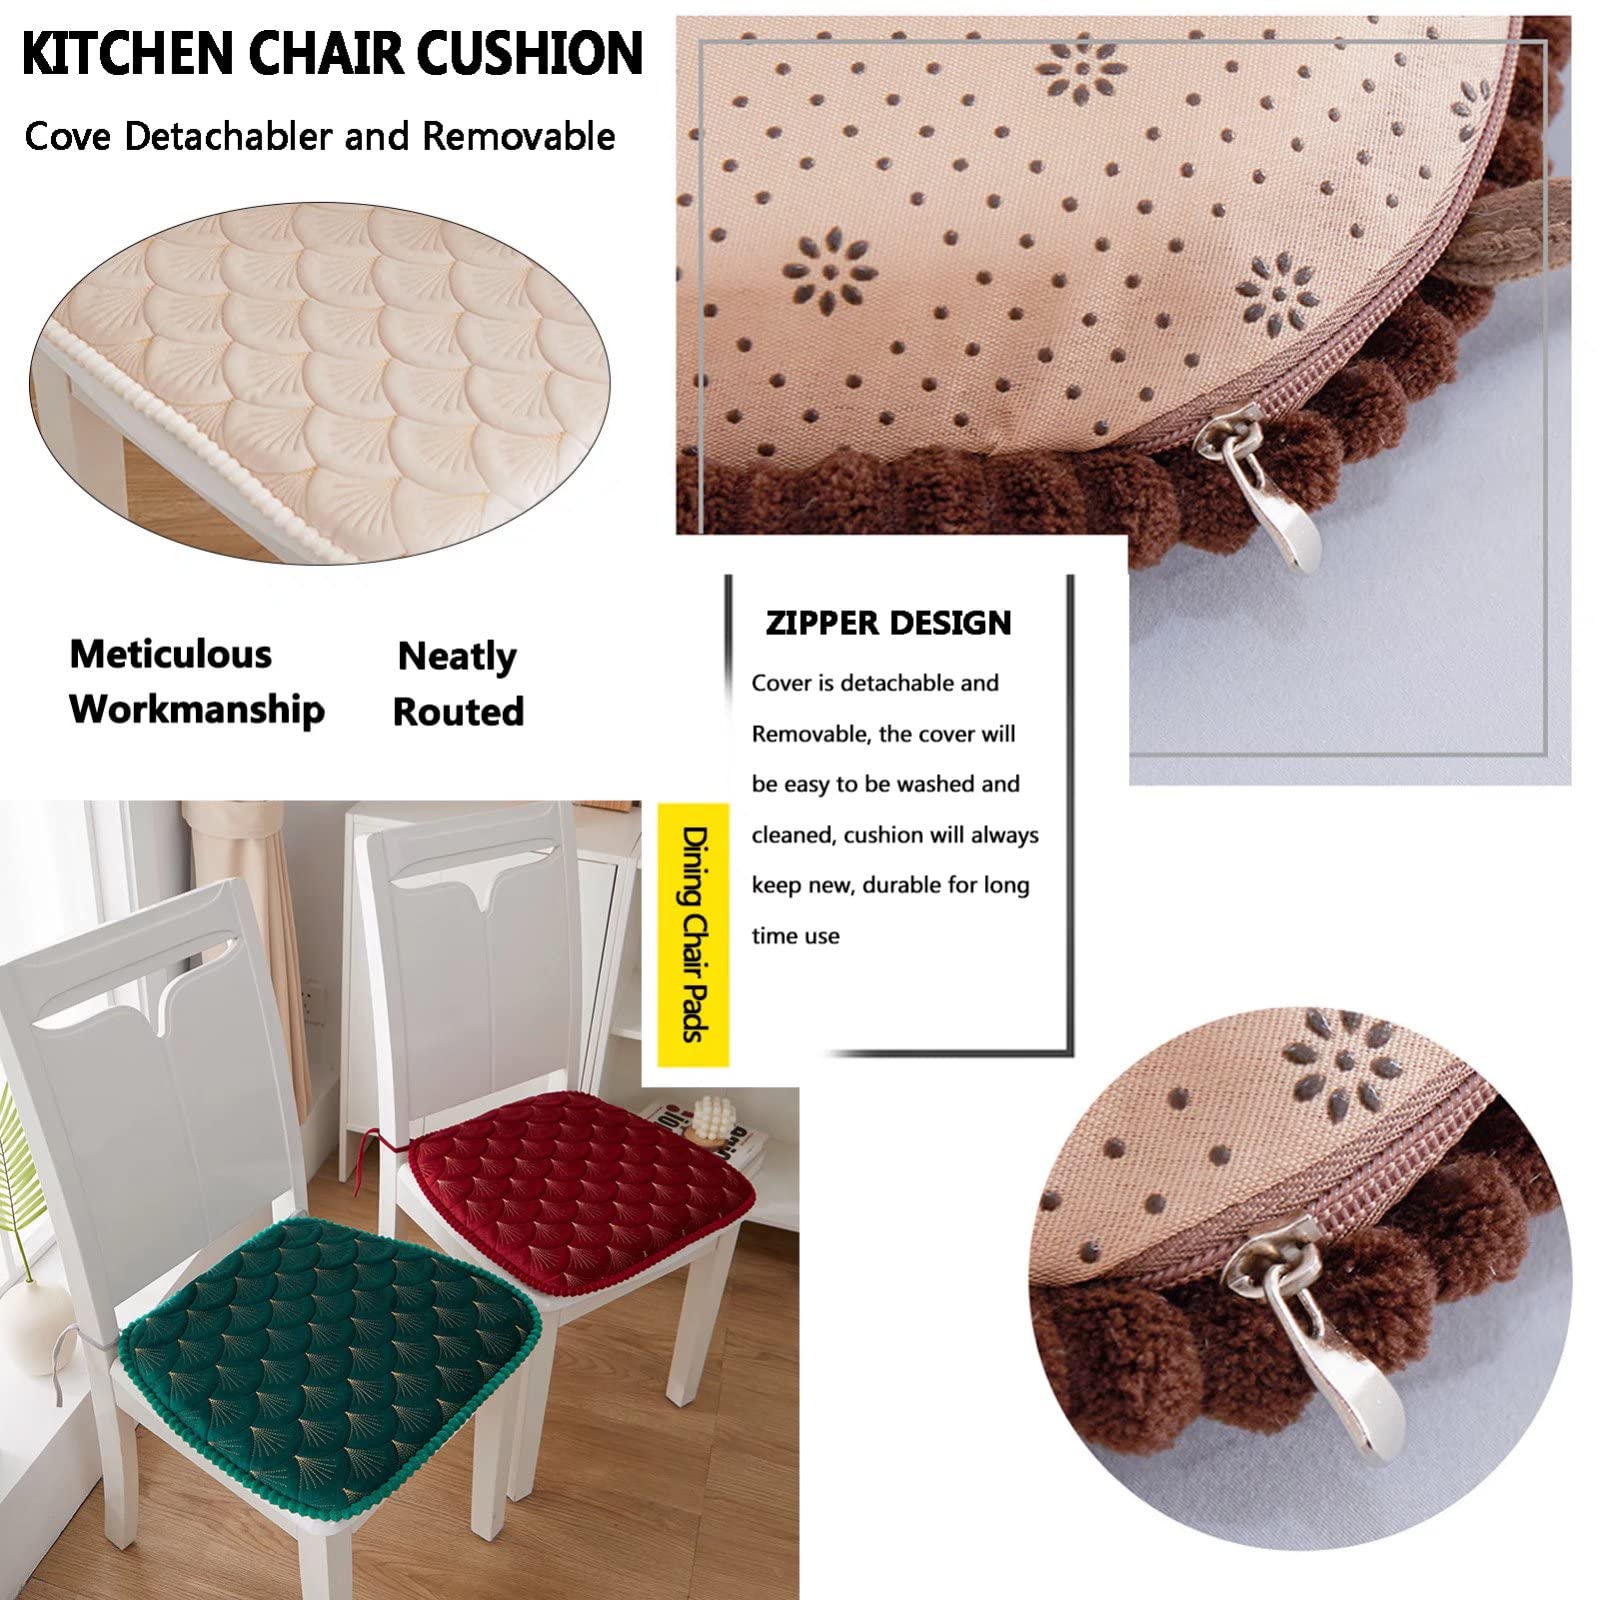 CUNCOO Kitchen Chair Cushions Set of 6 Dining Chair Pads 18"x18" Non Slip Seat Cushions Memory Foam Pads for Indoor Outdoor Home Office